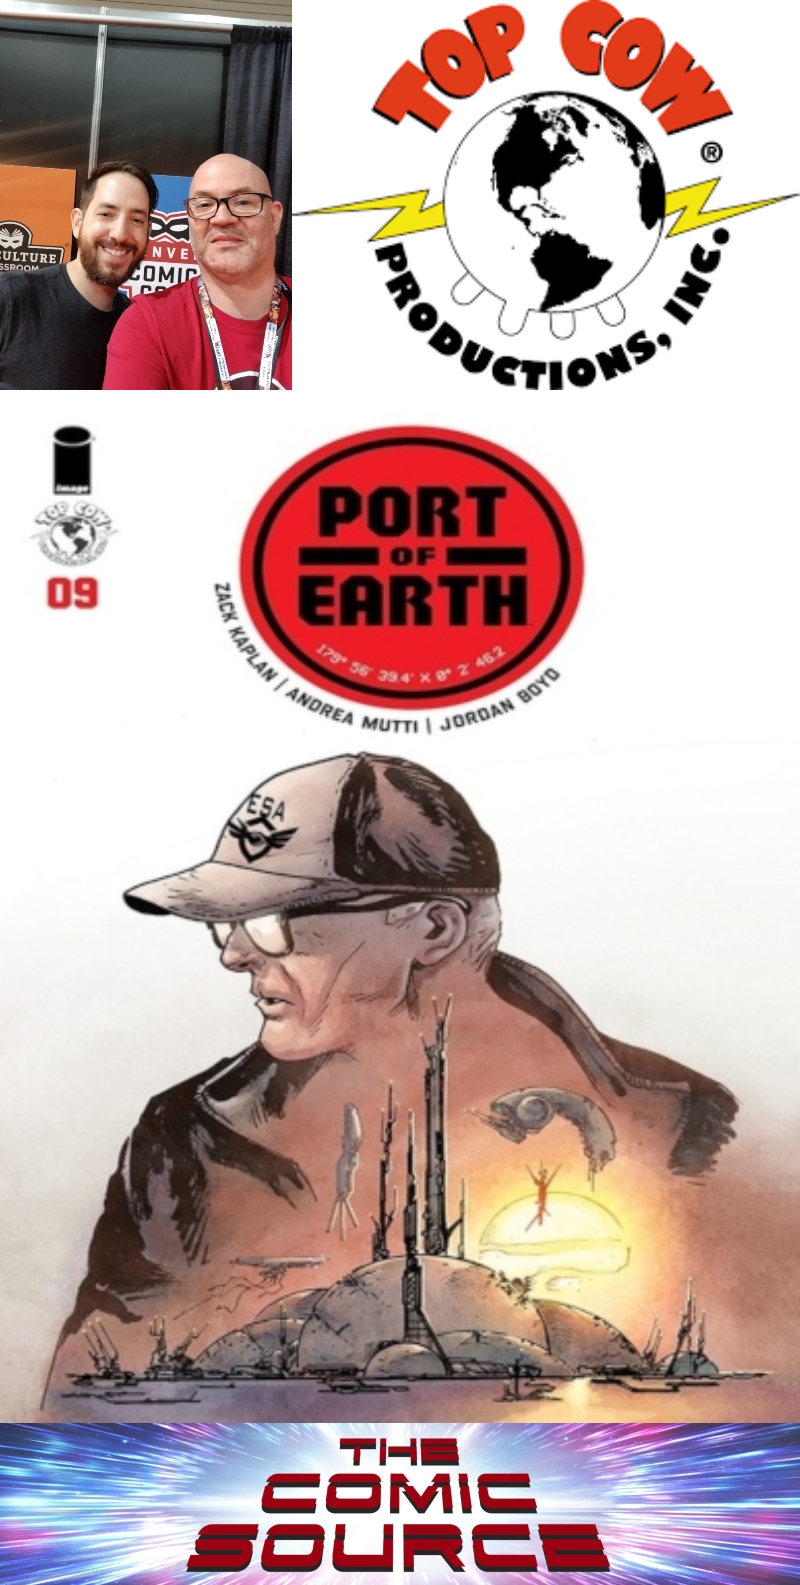 Top Cow Thursday – Port of Earth Returns with Zack Kaplan: The Comic Source Podcast Episode #806